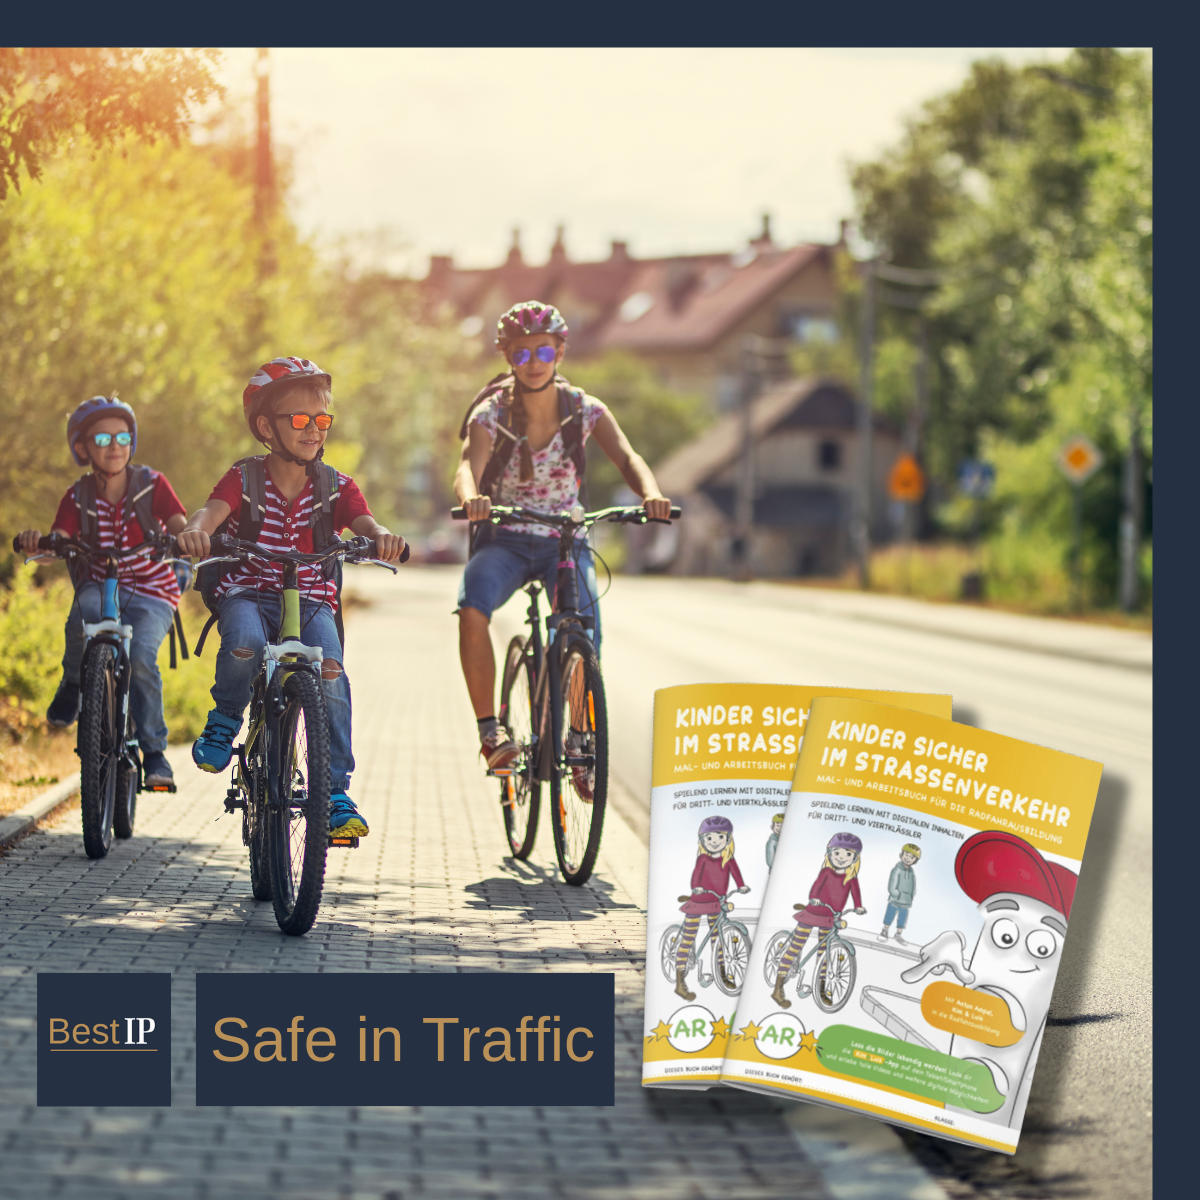 Children in Traffic: Our support to Safety Education